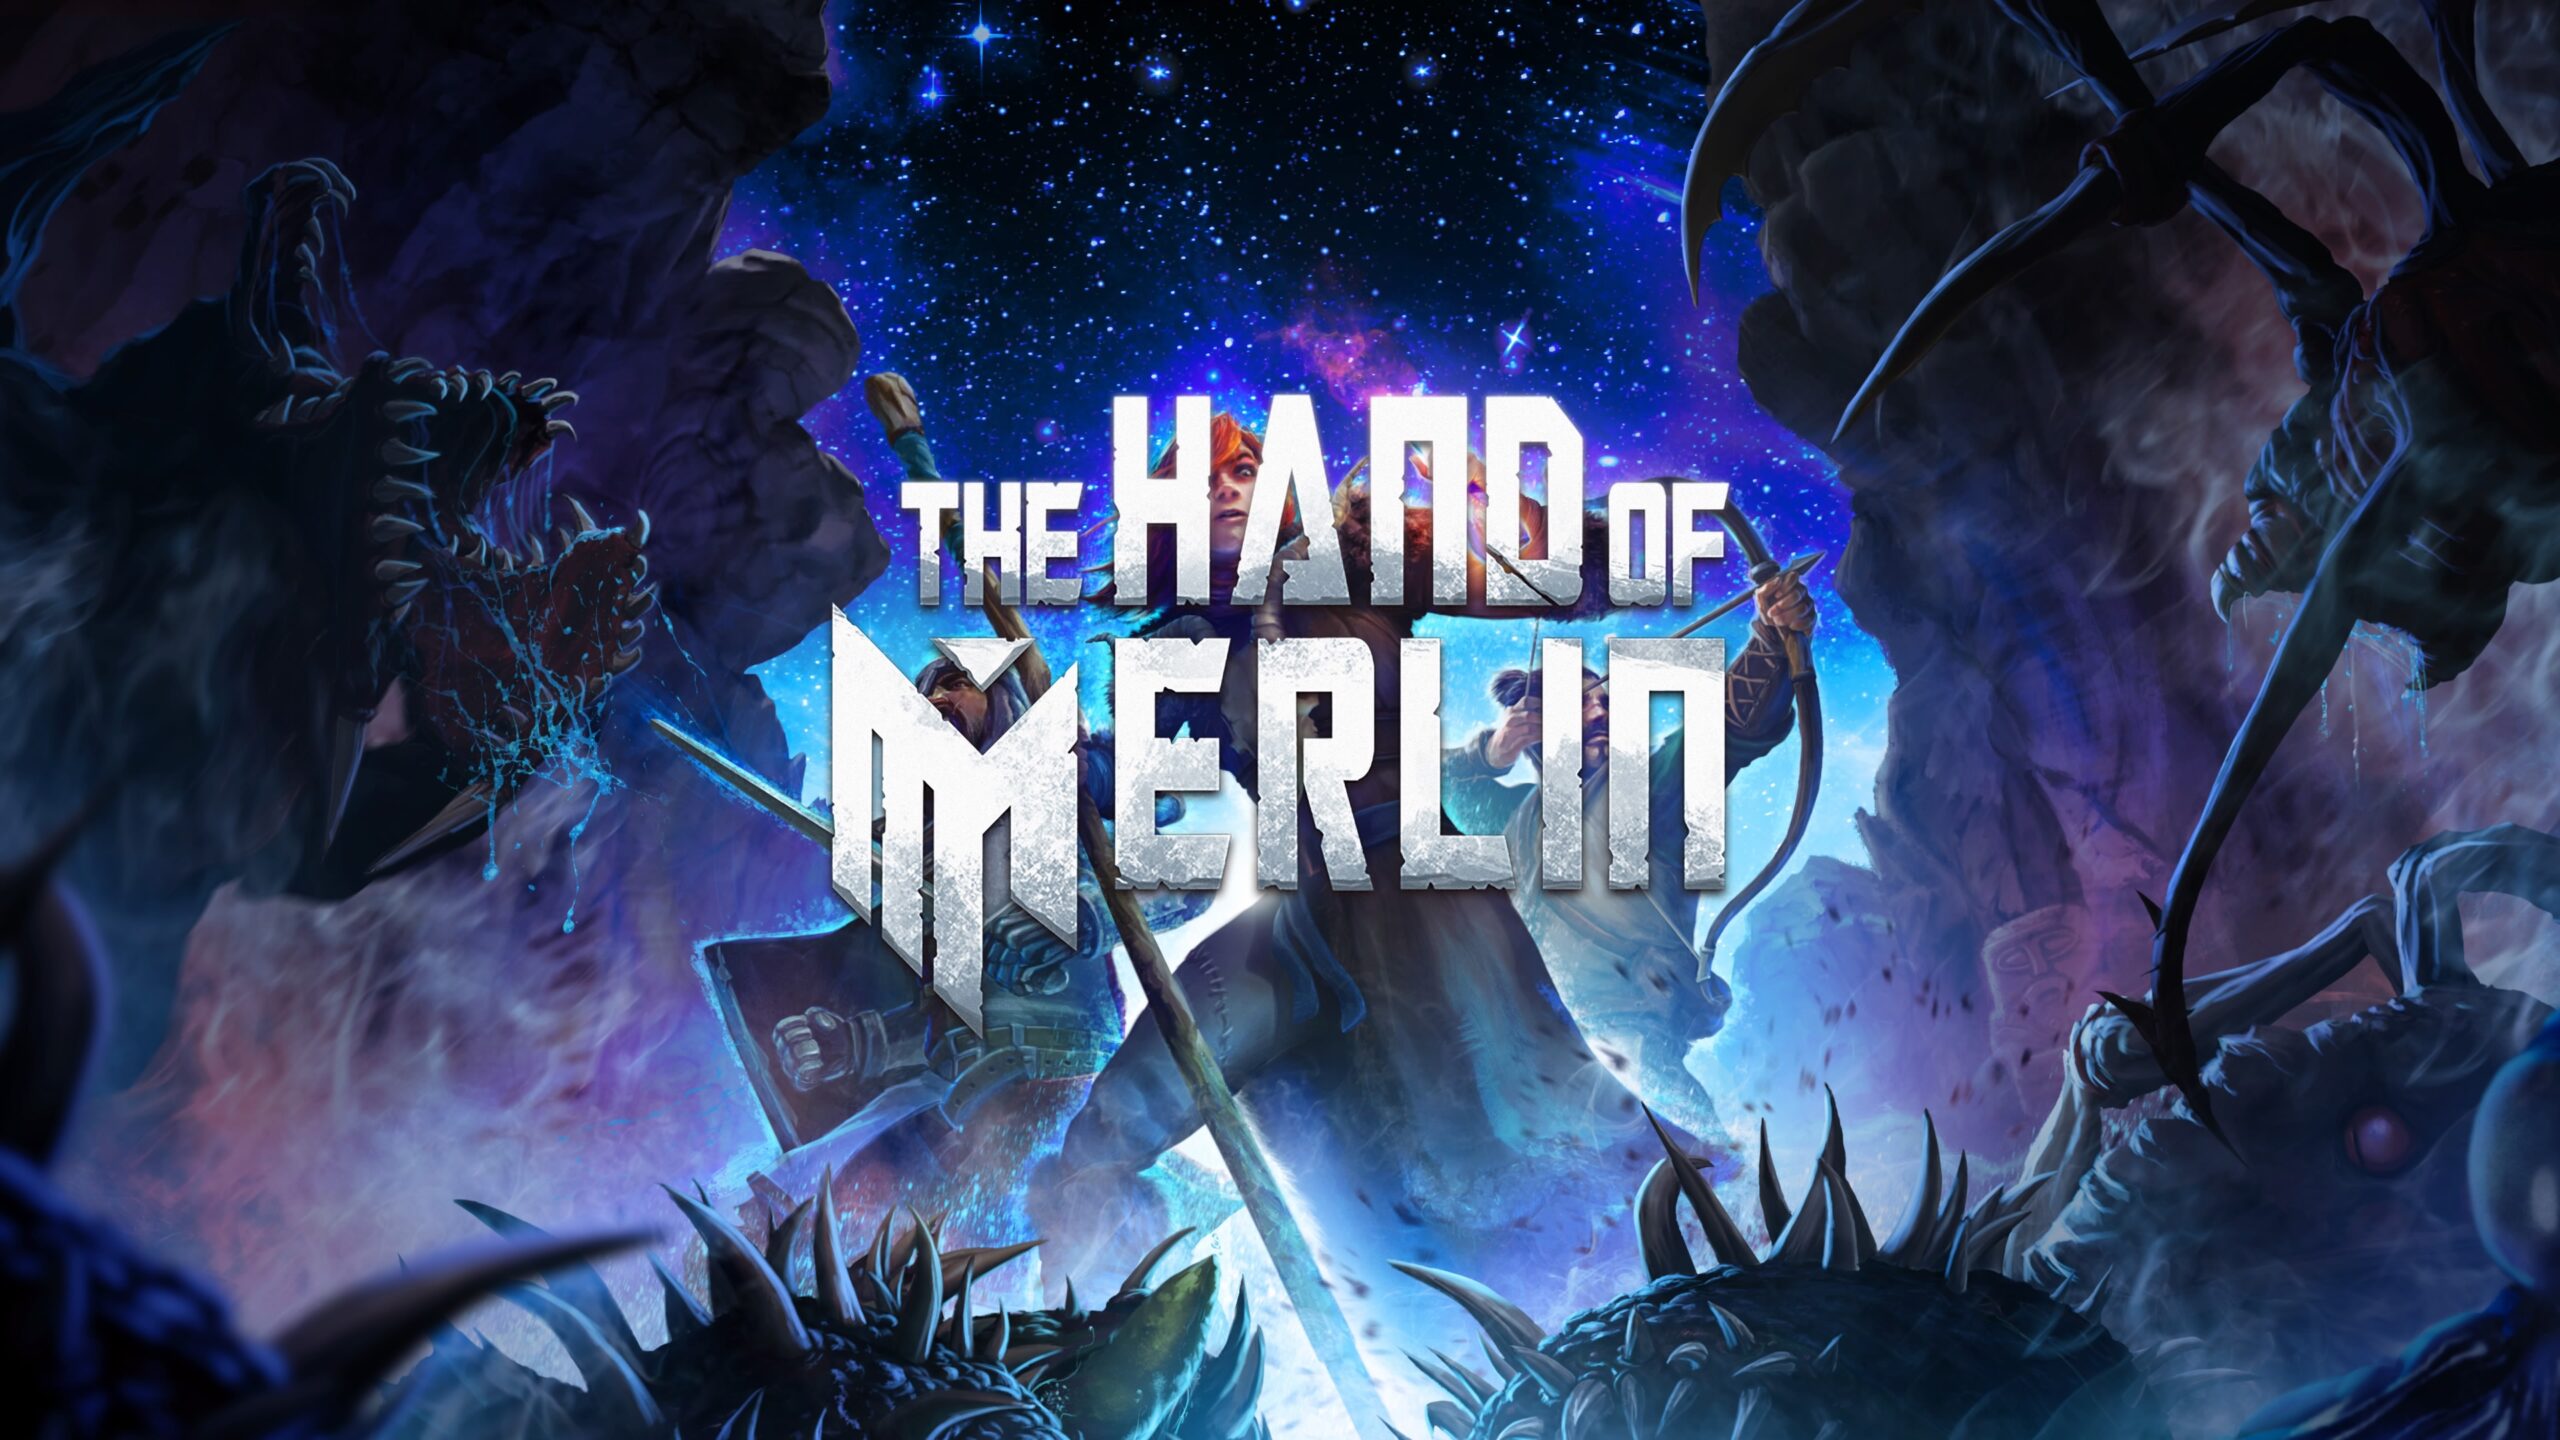 for mac download The Hand of Merlin